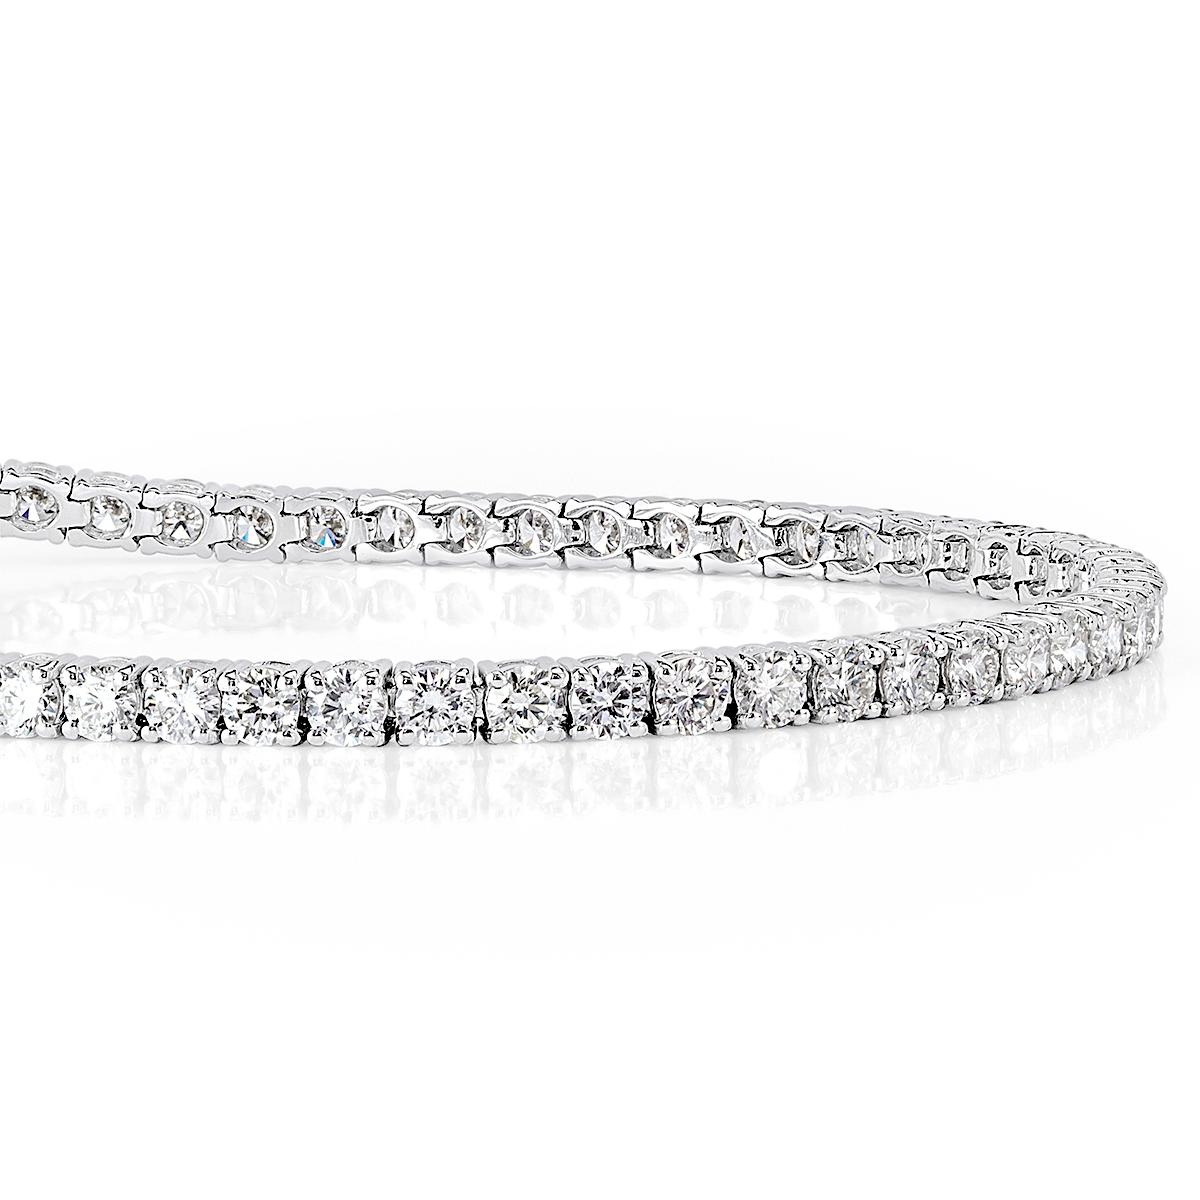 Truly elegant and timeless, this stunning diamond tennis bracelet showcases 3.48ct of round brilliant cut diamonds, GIA certified at F-G in color, VS2-SI1 in clarity. They are impeccably matched and set in classic four-prong setting style that